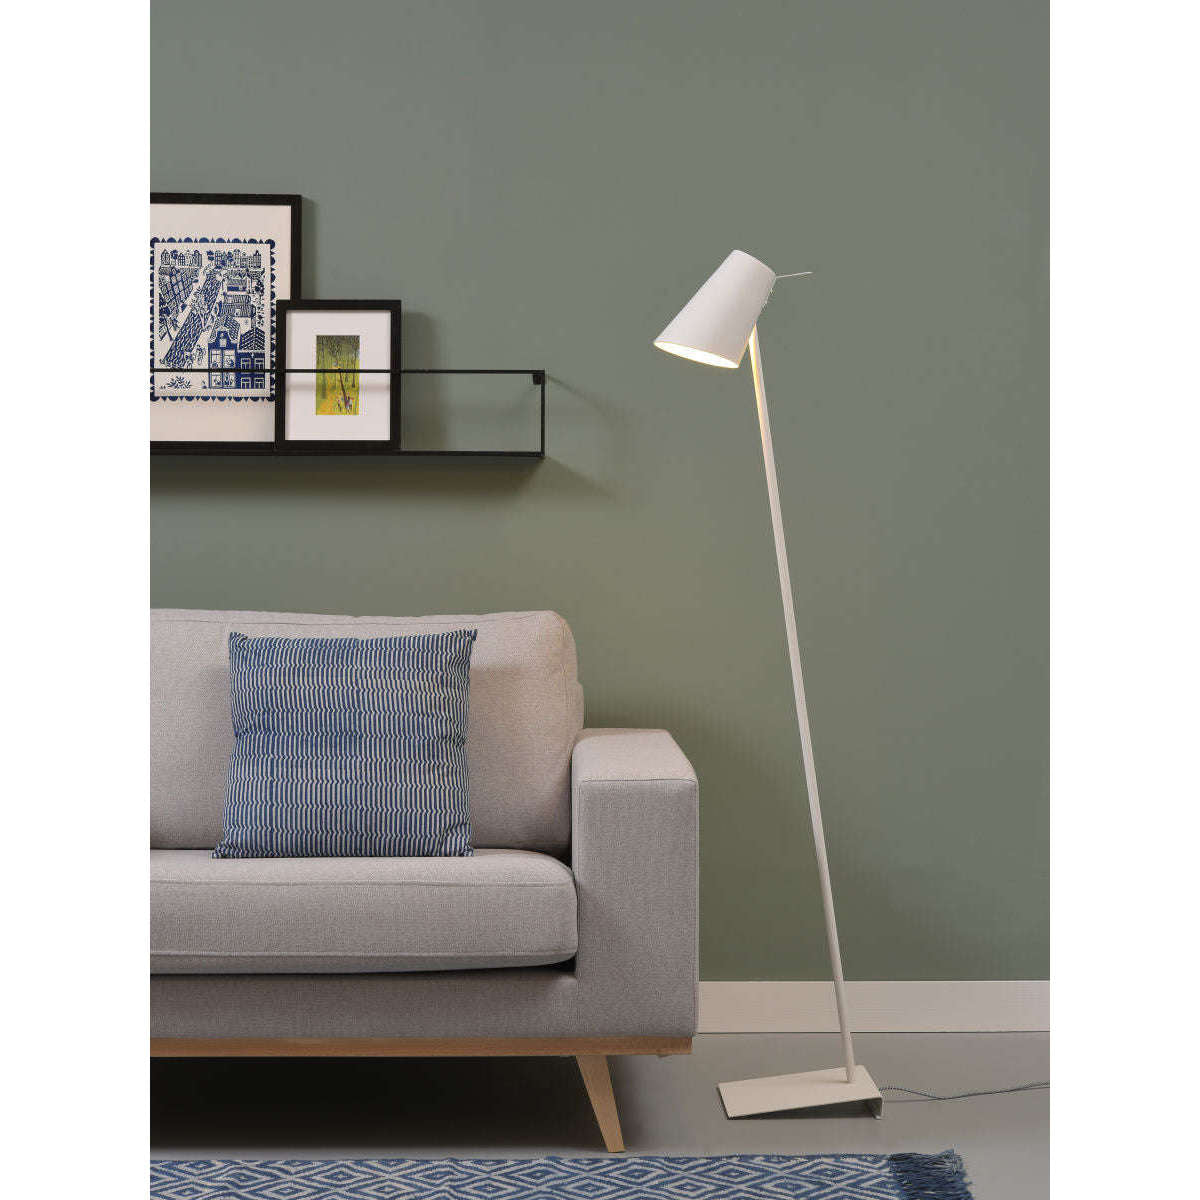 It's about RoMi Vloerlamp ijzer / rubber finish Cardiff wit